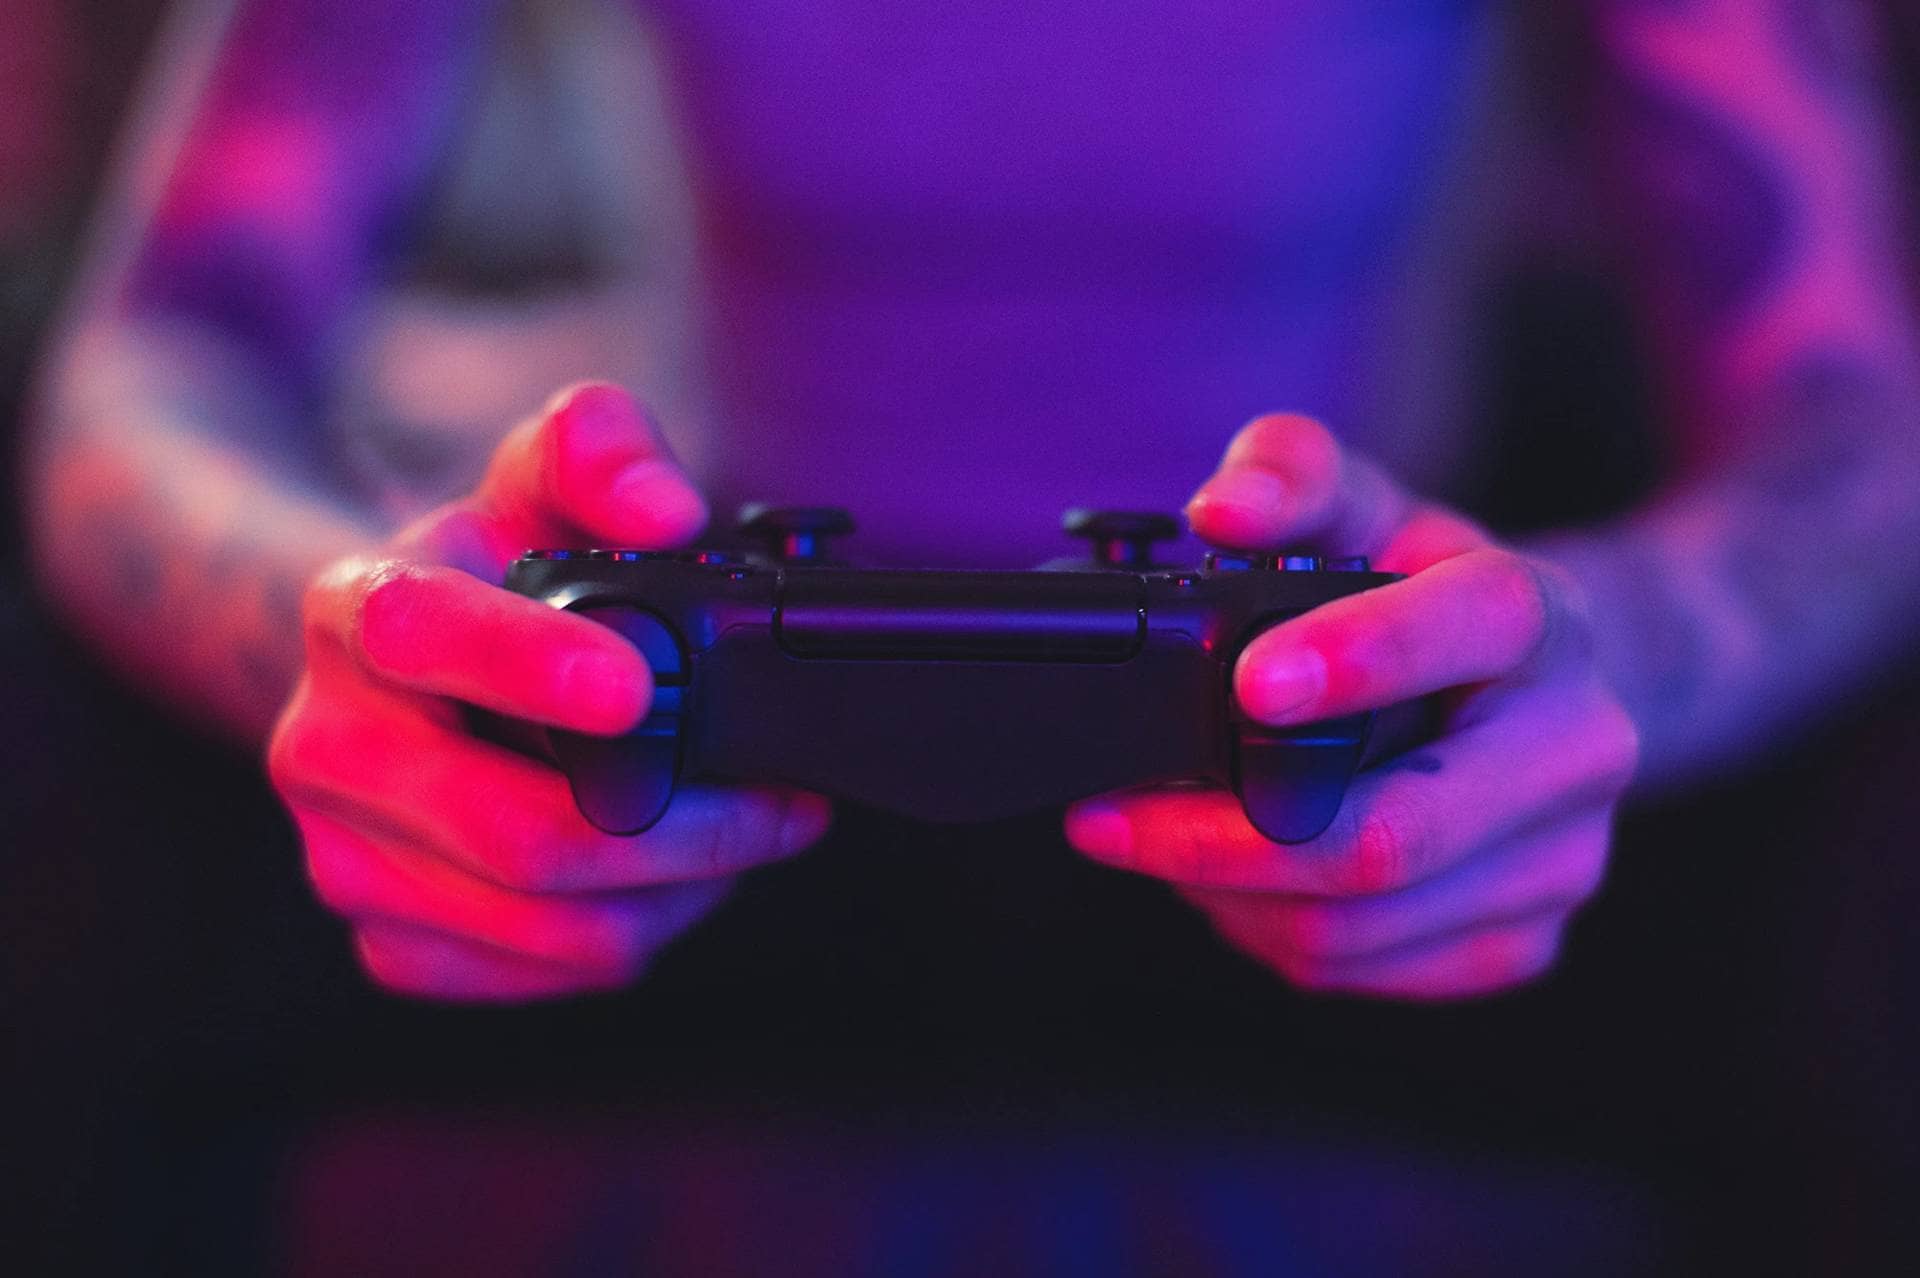 Video games have no direct effect on our happiness